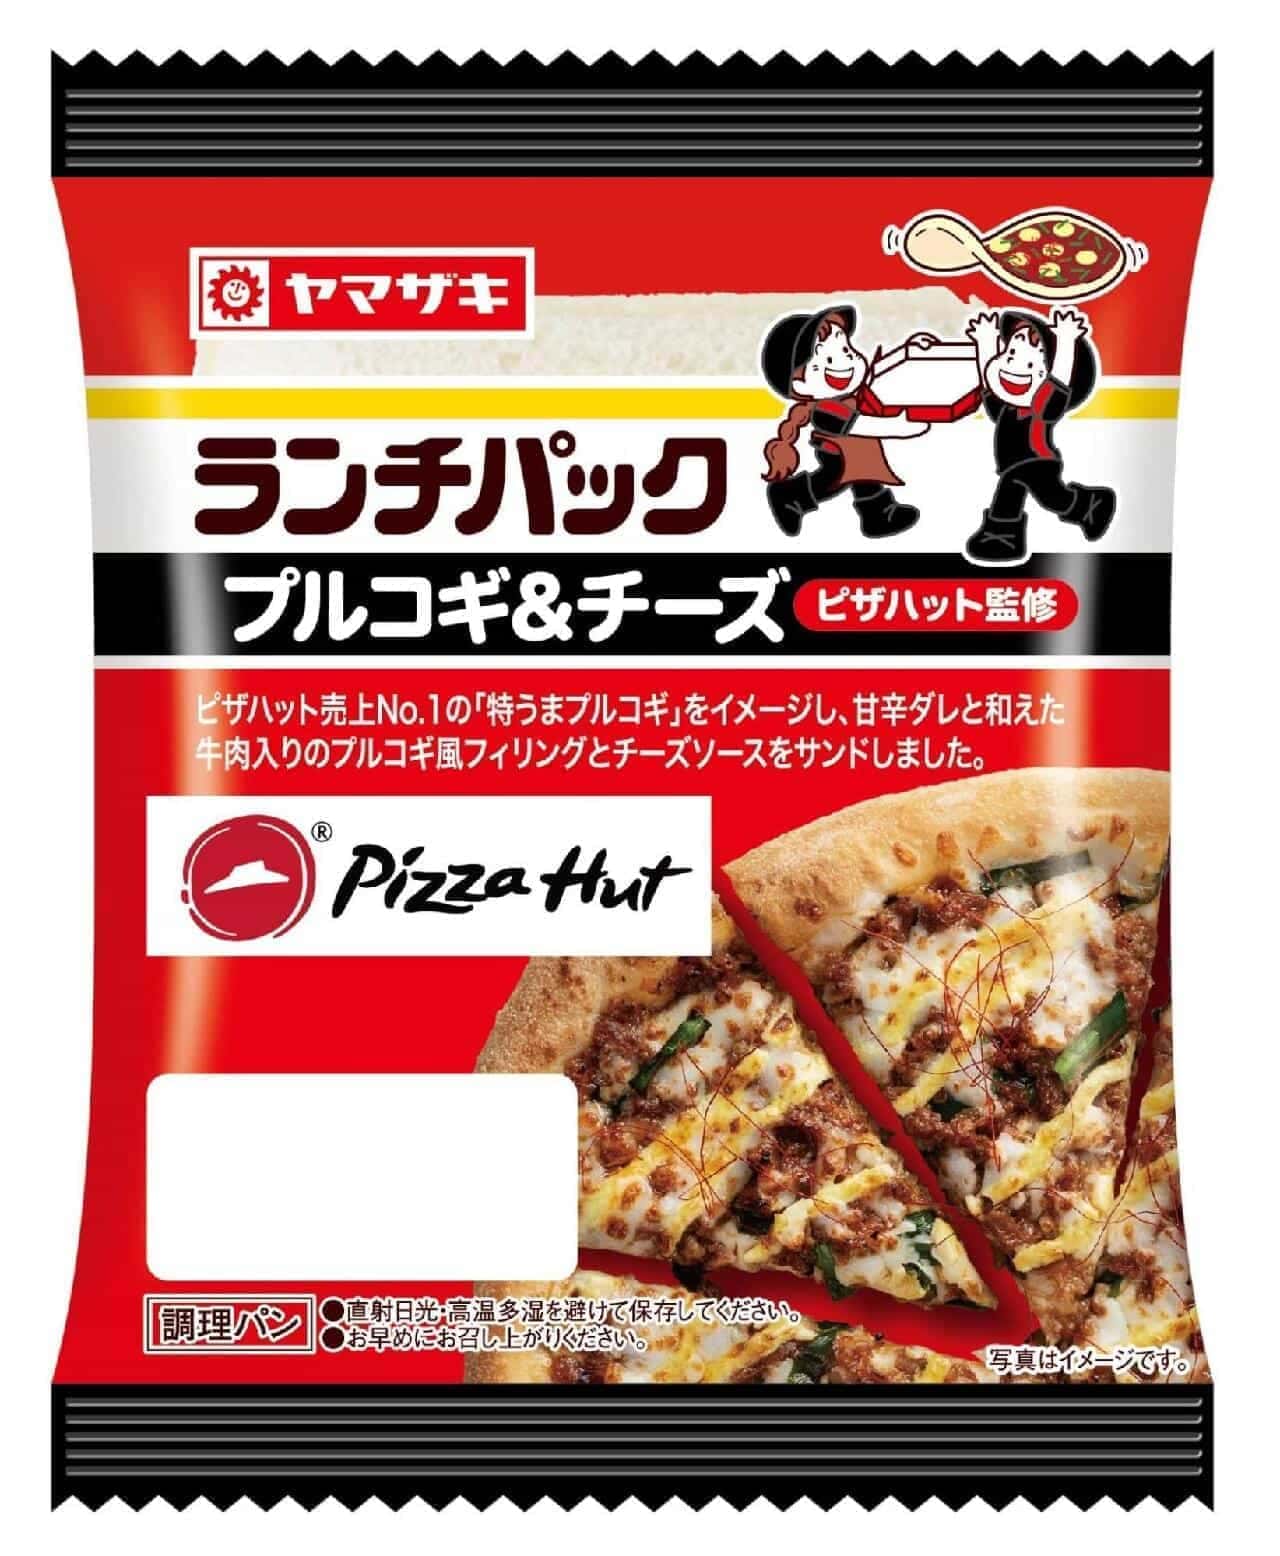 Collaboration with Pizza Hut "Lunch Pack Bulgogi & Cheese"